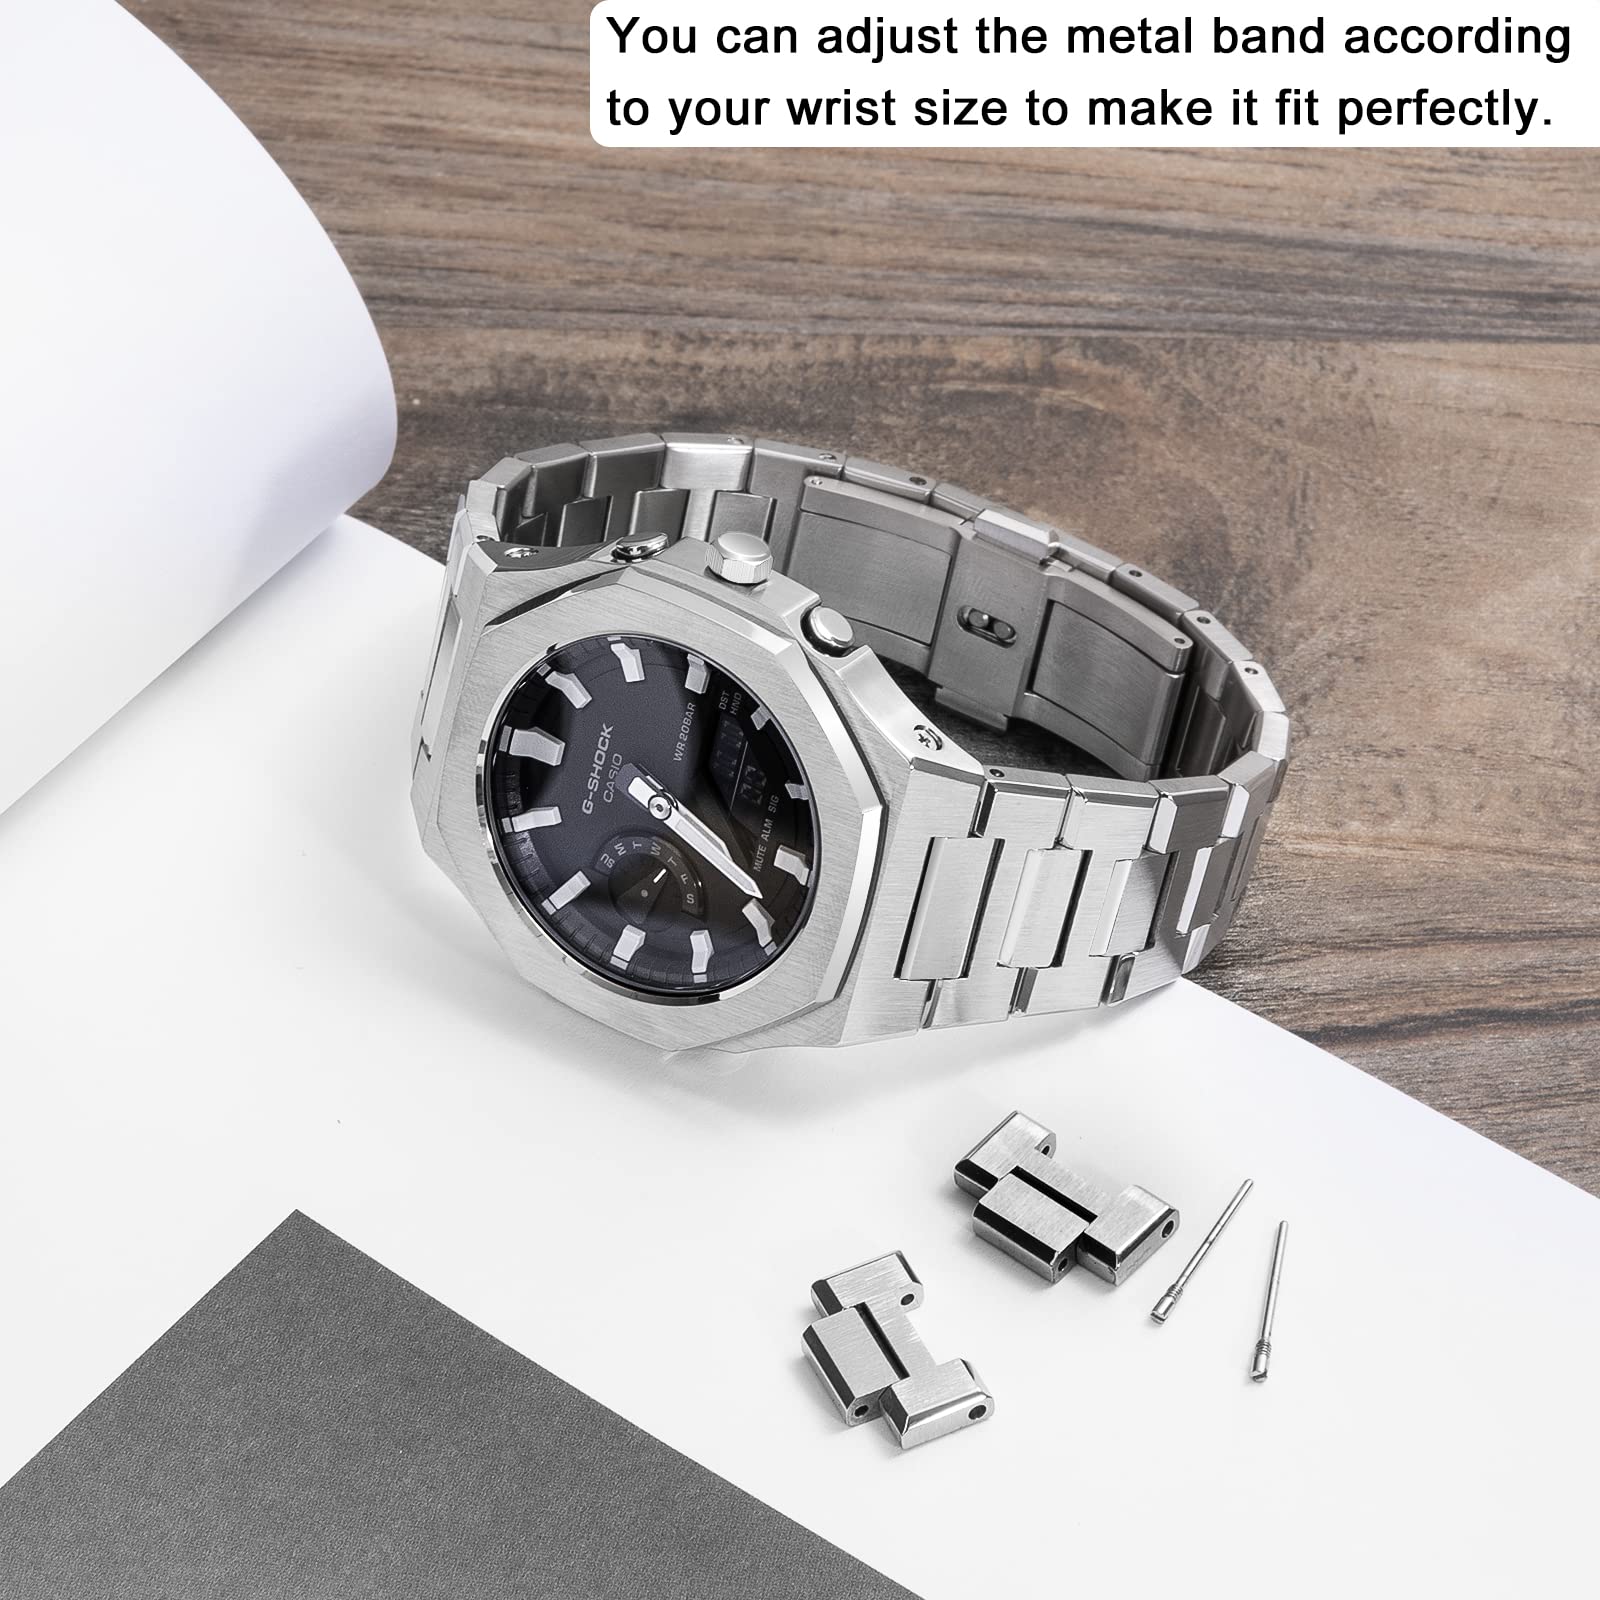 Hontao GA2100 5rd Model Home Oak All Metal Bezel Strap Simple Style In-one Watch Bands For GA2100/2110 Accessories